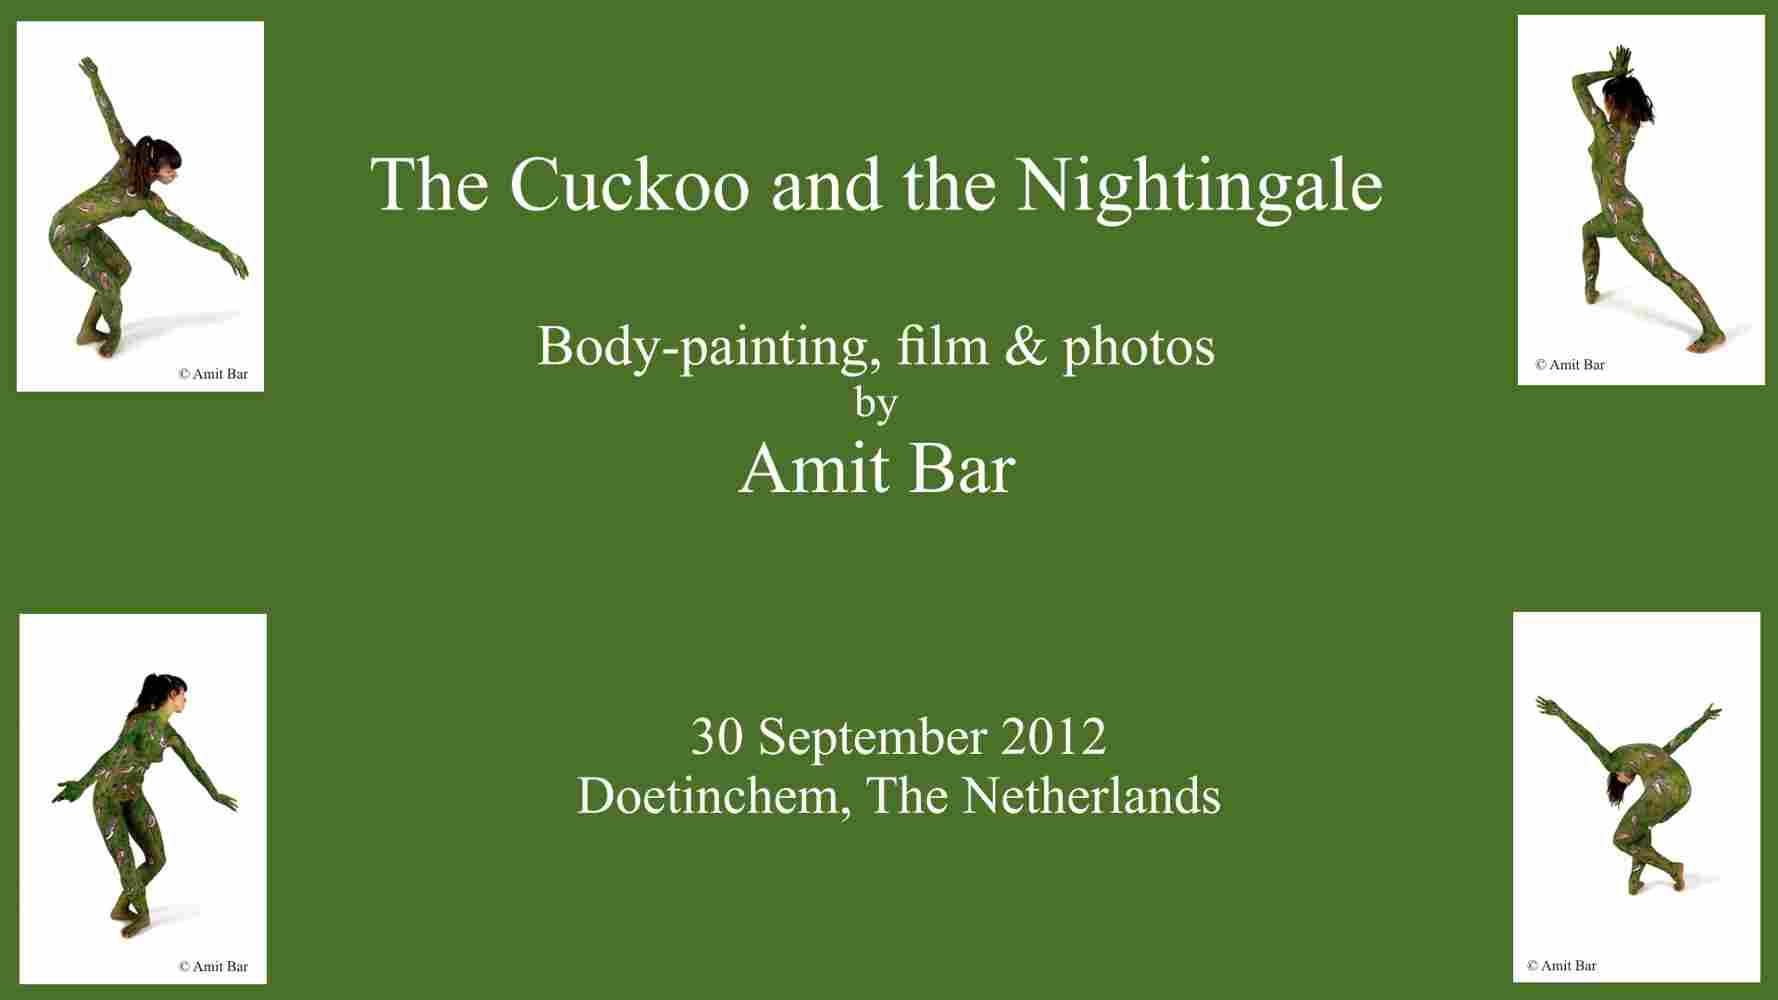 Cuckoo & Nightingale video: This body-painting was inspired by the Cuckoo and the Nightingale, which considered as loveliest singers among birds.